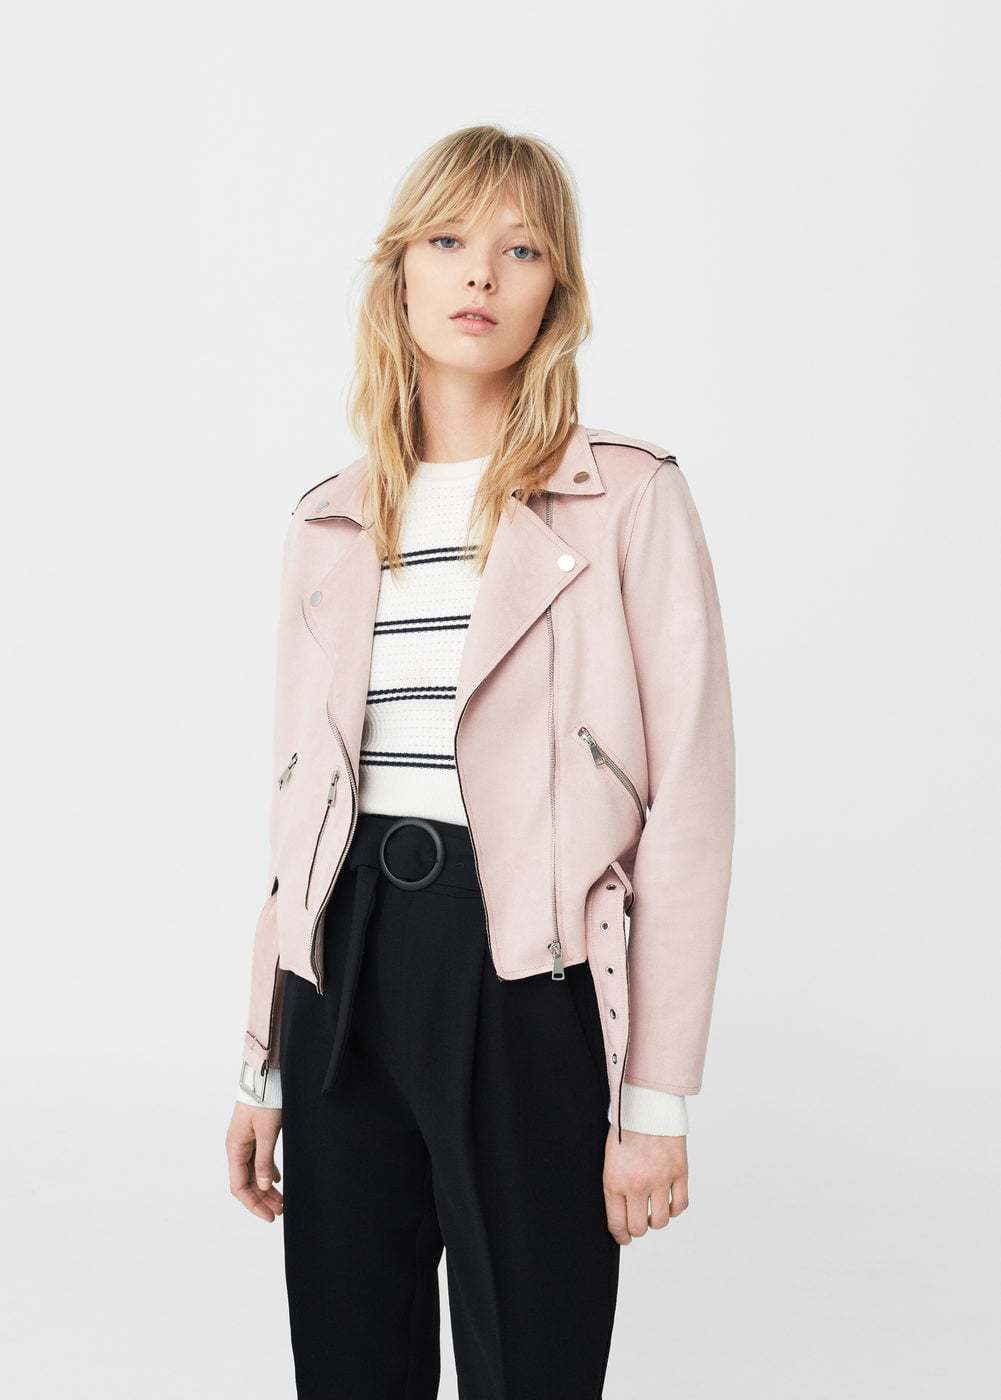 Image of a woman wearing a pink leather jacket for an article about how to wear pink in spring